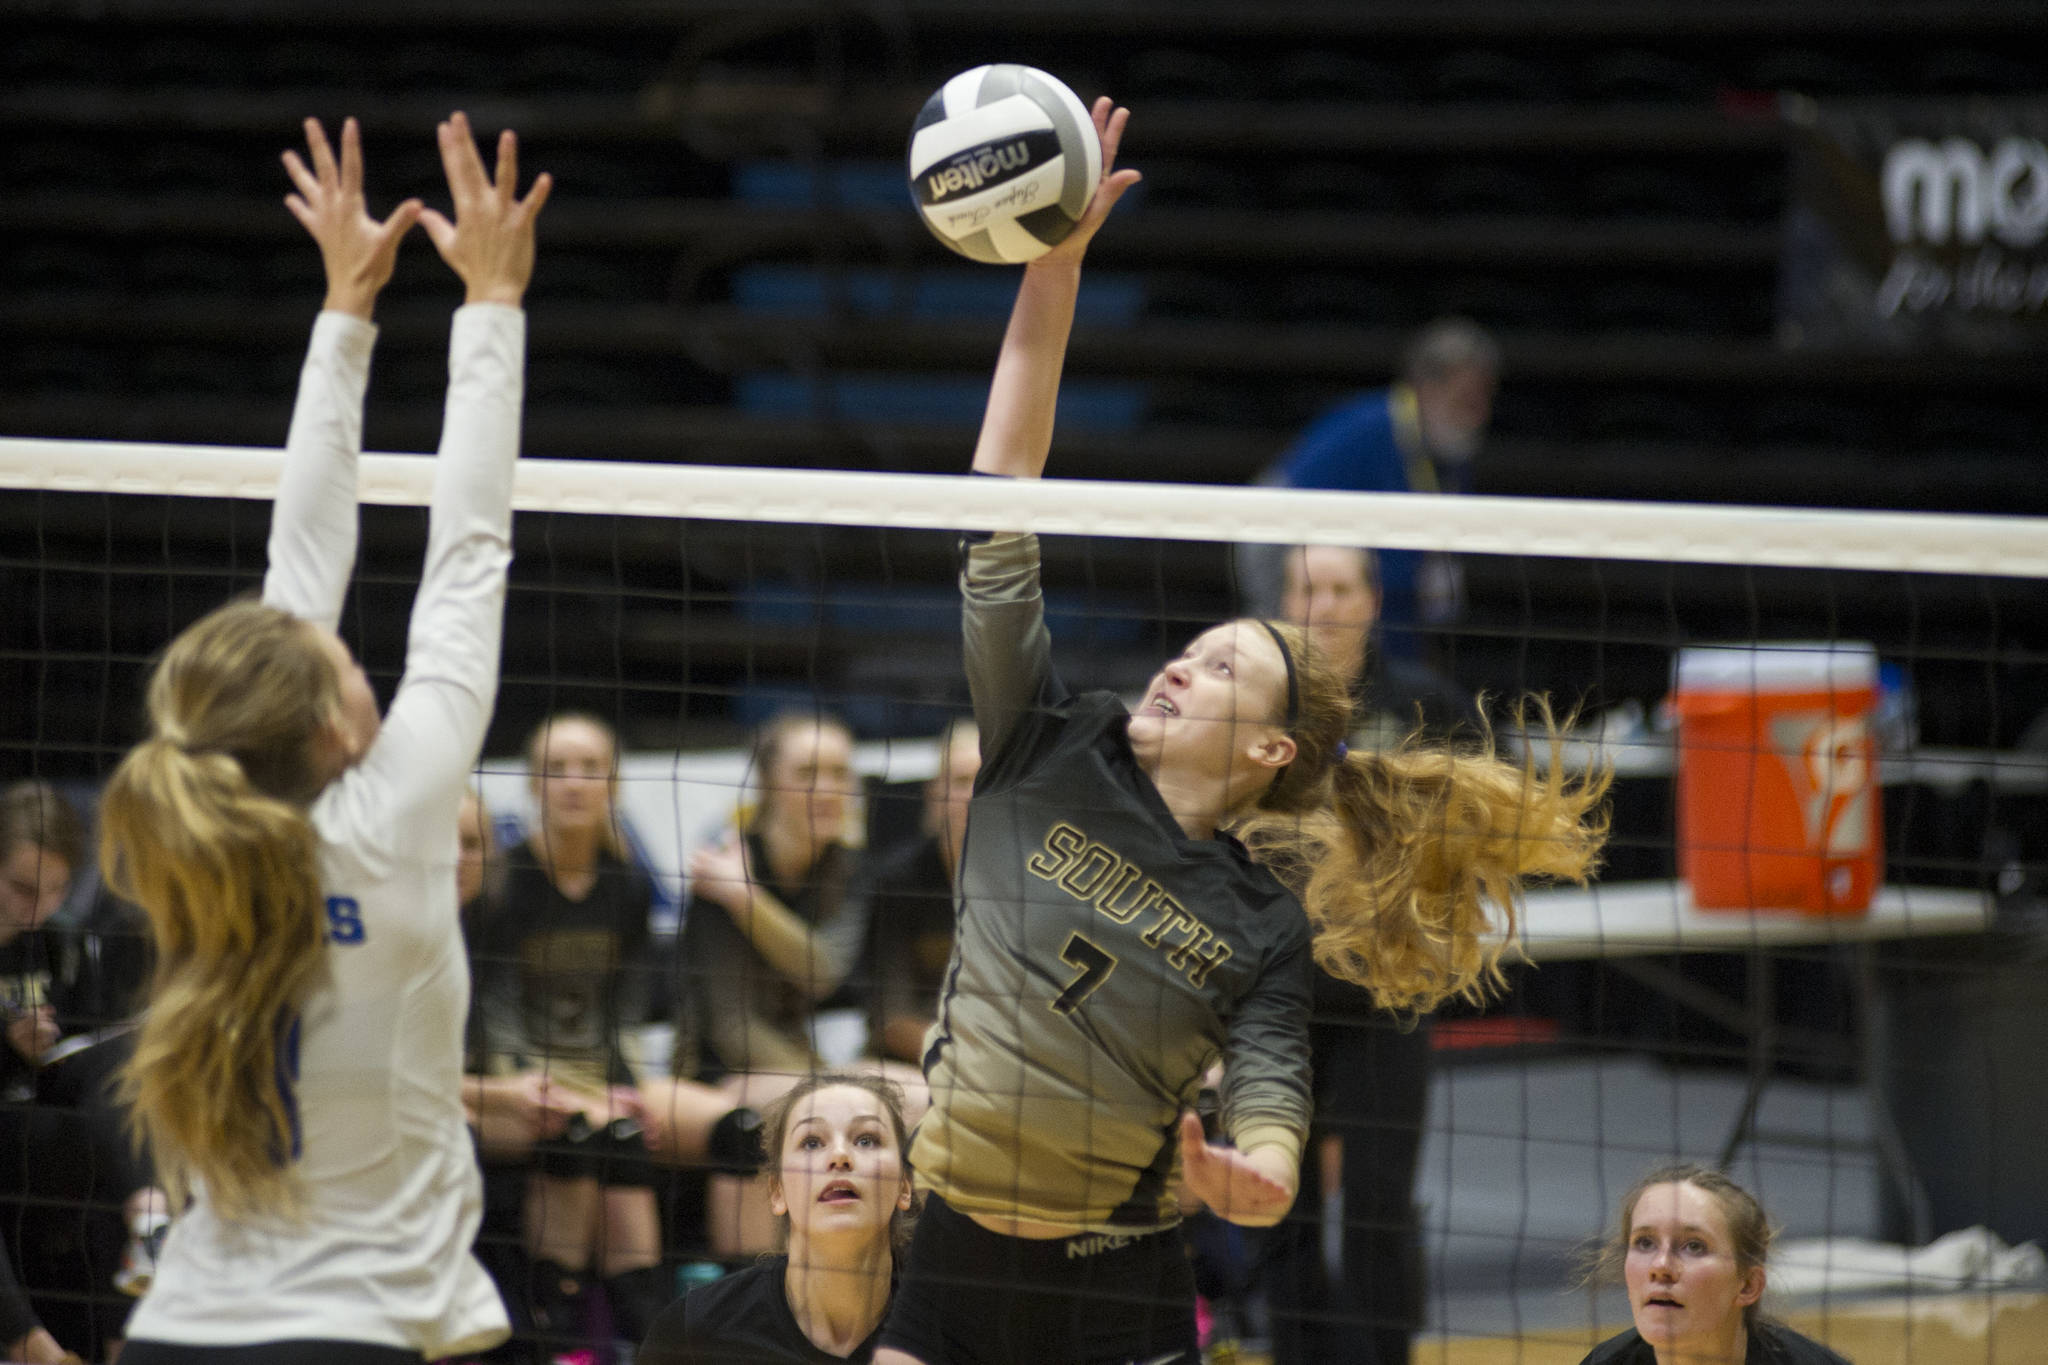 South Anchorage High School sophomore Kinsey Schilke spikes the ball as Thunder Mountain’s Lily Smith goes up for the block at the ASAA/First National Bank Alaska 3A/4A Volleyball State Championships on Friday at the Alaska Airlines Center in Anchorage. South won 3-0 (25-10, 25-21, 25-12). (Nolin Ainsworth | Juneau Empire)